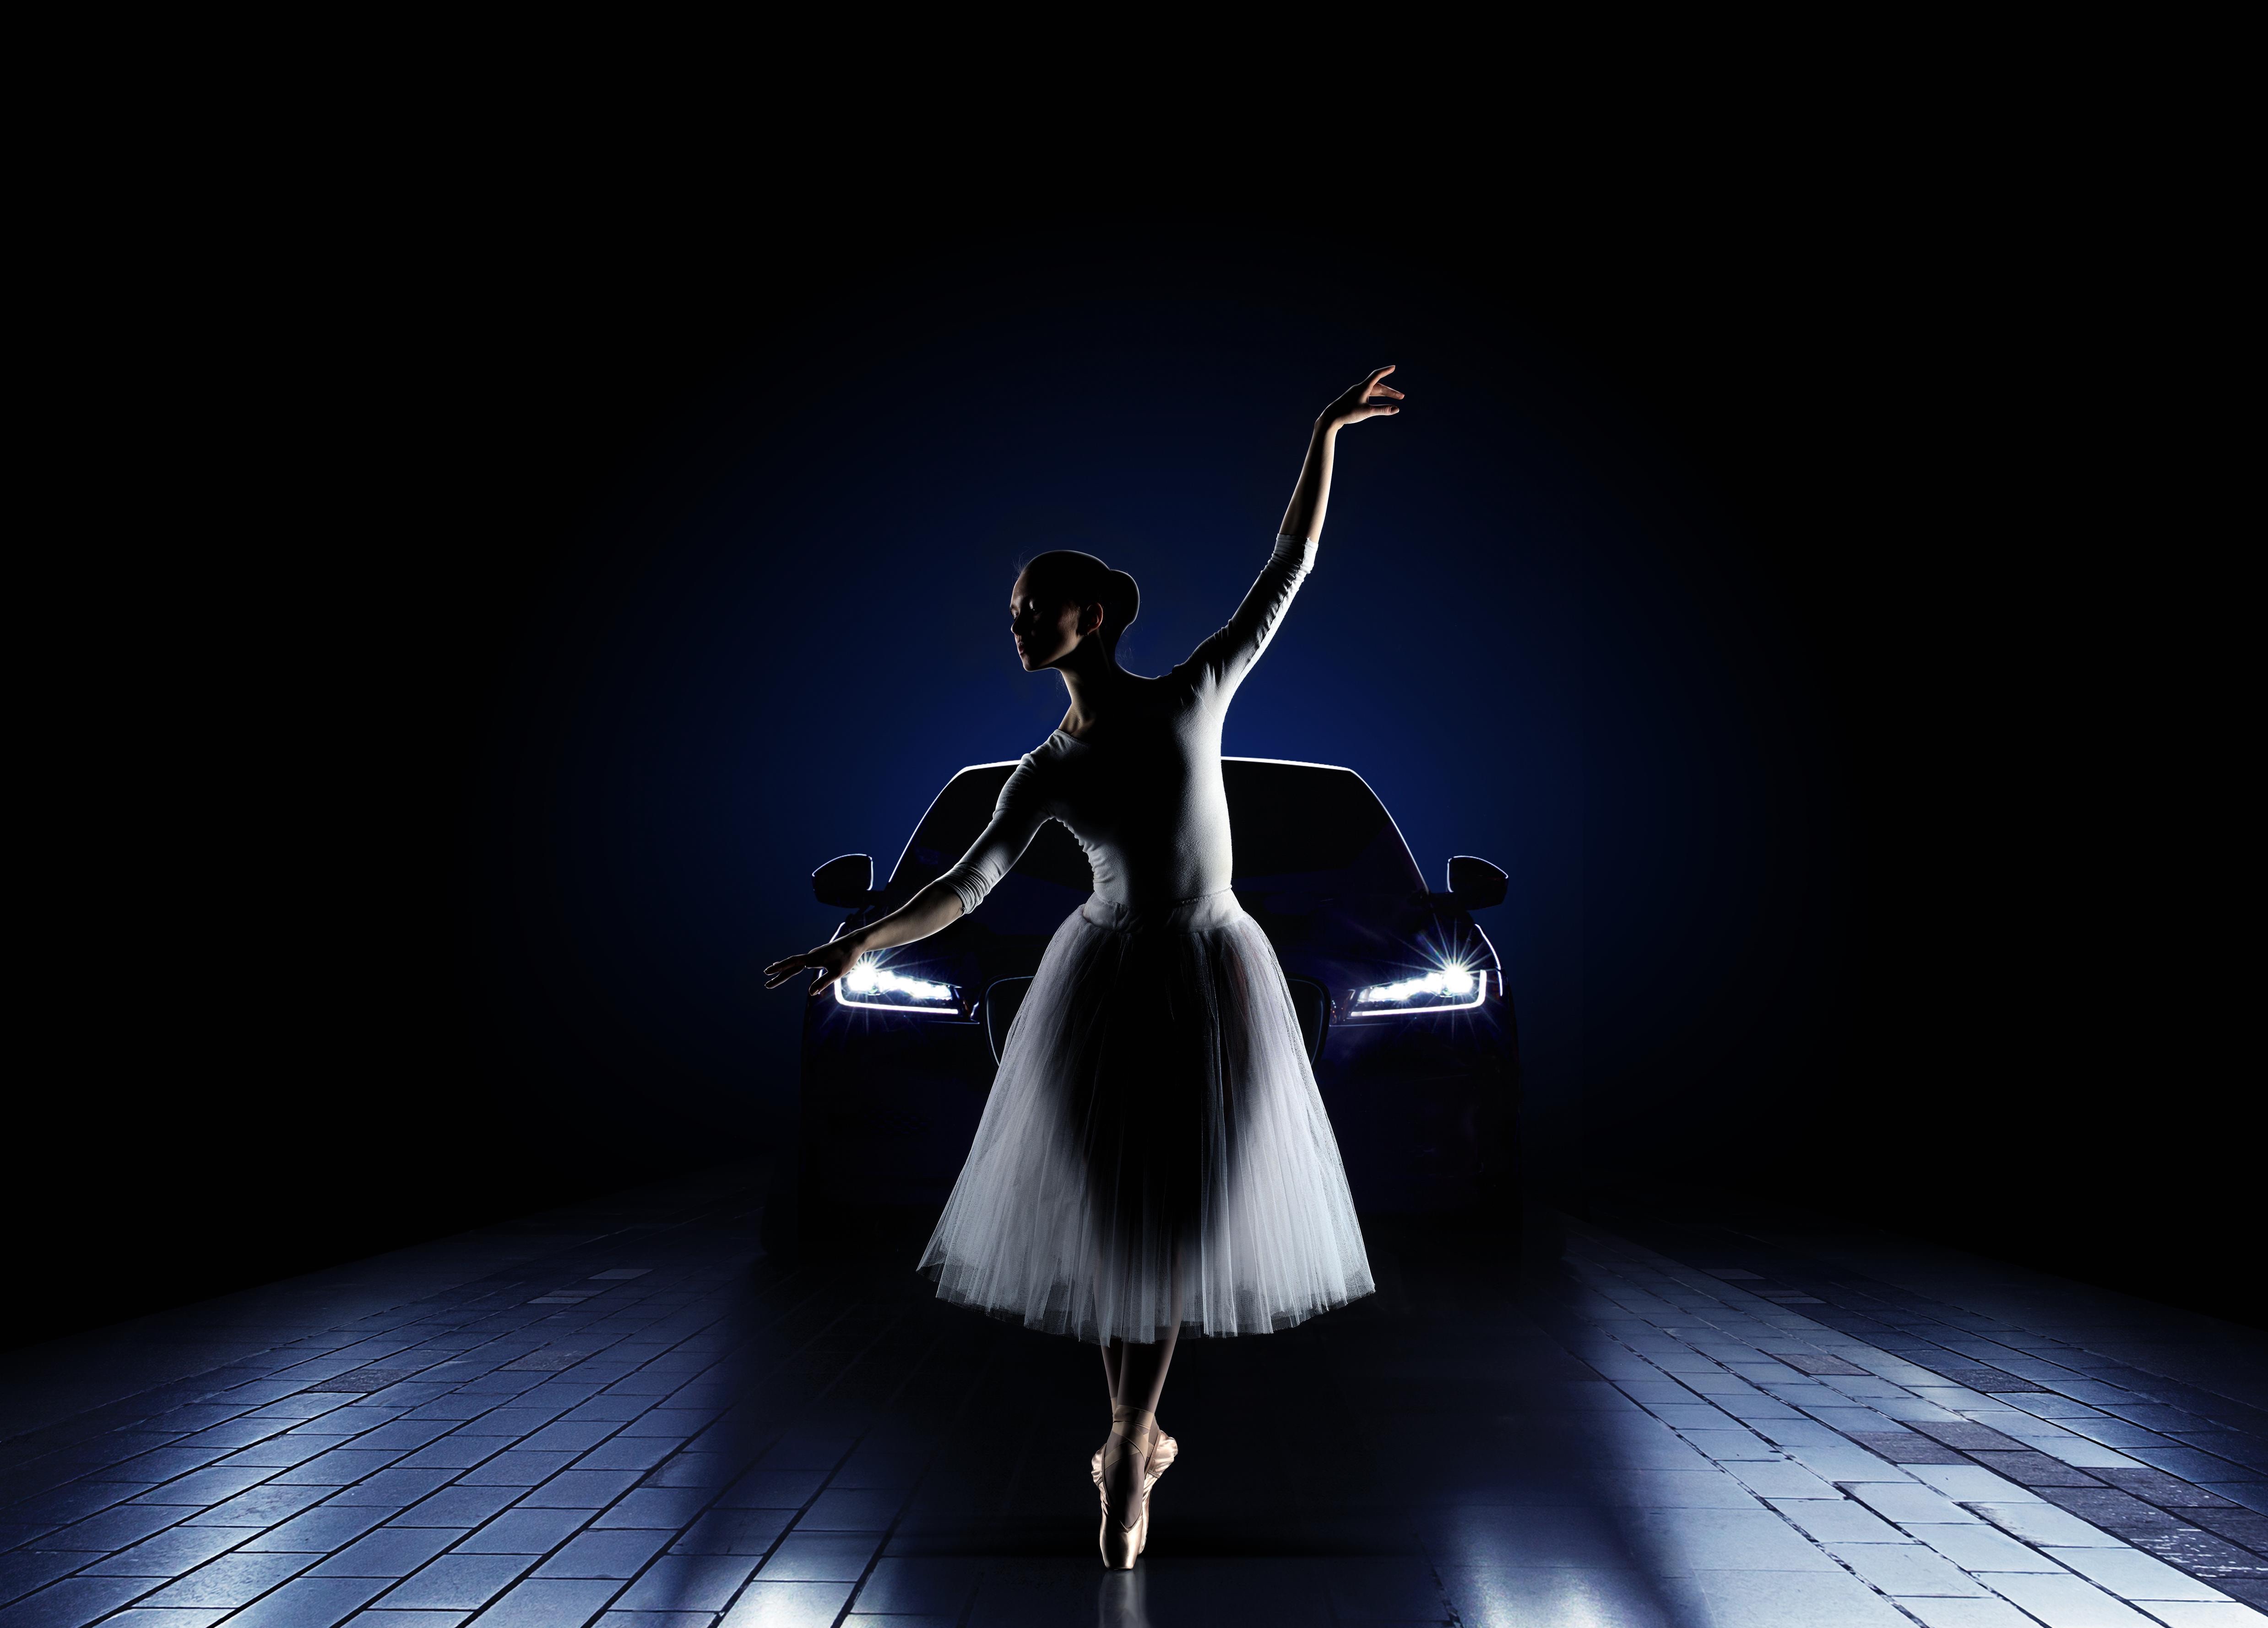 girl, cars, ballerina, car collection of HD images